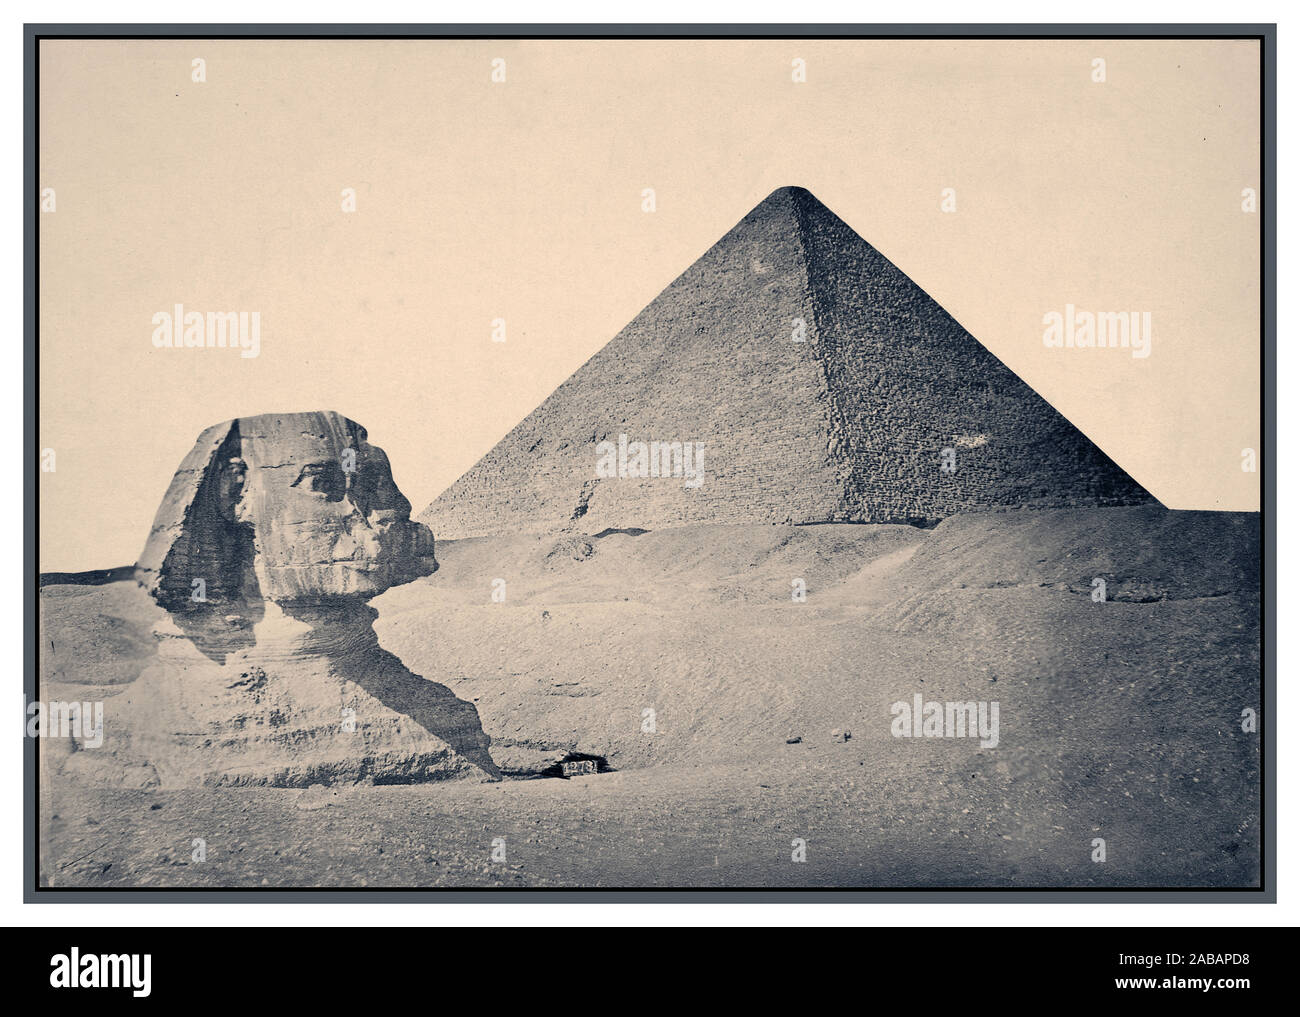 1880's Vintage Giza. Pyramid of Khafre and Sphinx 1880's B&W sepia image of Giza. ca. 2575 BC-ca. 2465 BC (Pyramid and Sphinx) Pyramids of Giza, Muḩāfaz̧at Maţrūḩ, Egypt Africa Egyptian Egyptian ancient, 4th Dynasty Great Sphinx of Giza, commonly referred to as the Sphinx of Giza or just the Sphinx, is a limestone statue of a reclining sphinx, a mythical creature with the body of a lion and the head of a human Facing directly from West to East, it stands on the Giza Plateau on the west bank of the Nile in Giza, Egypt. Stock Photo